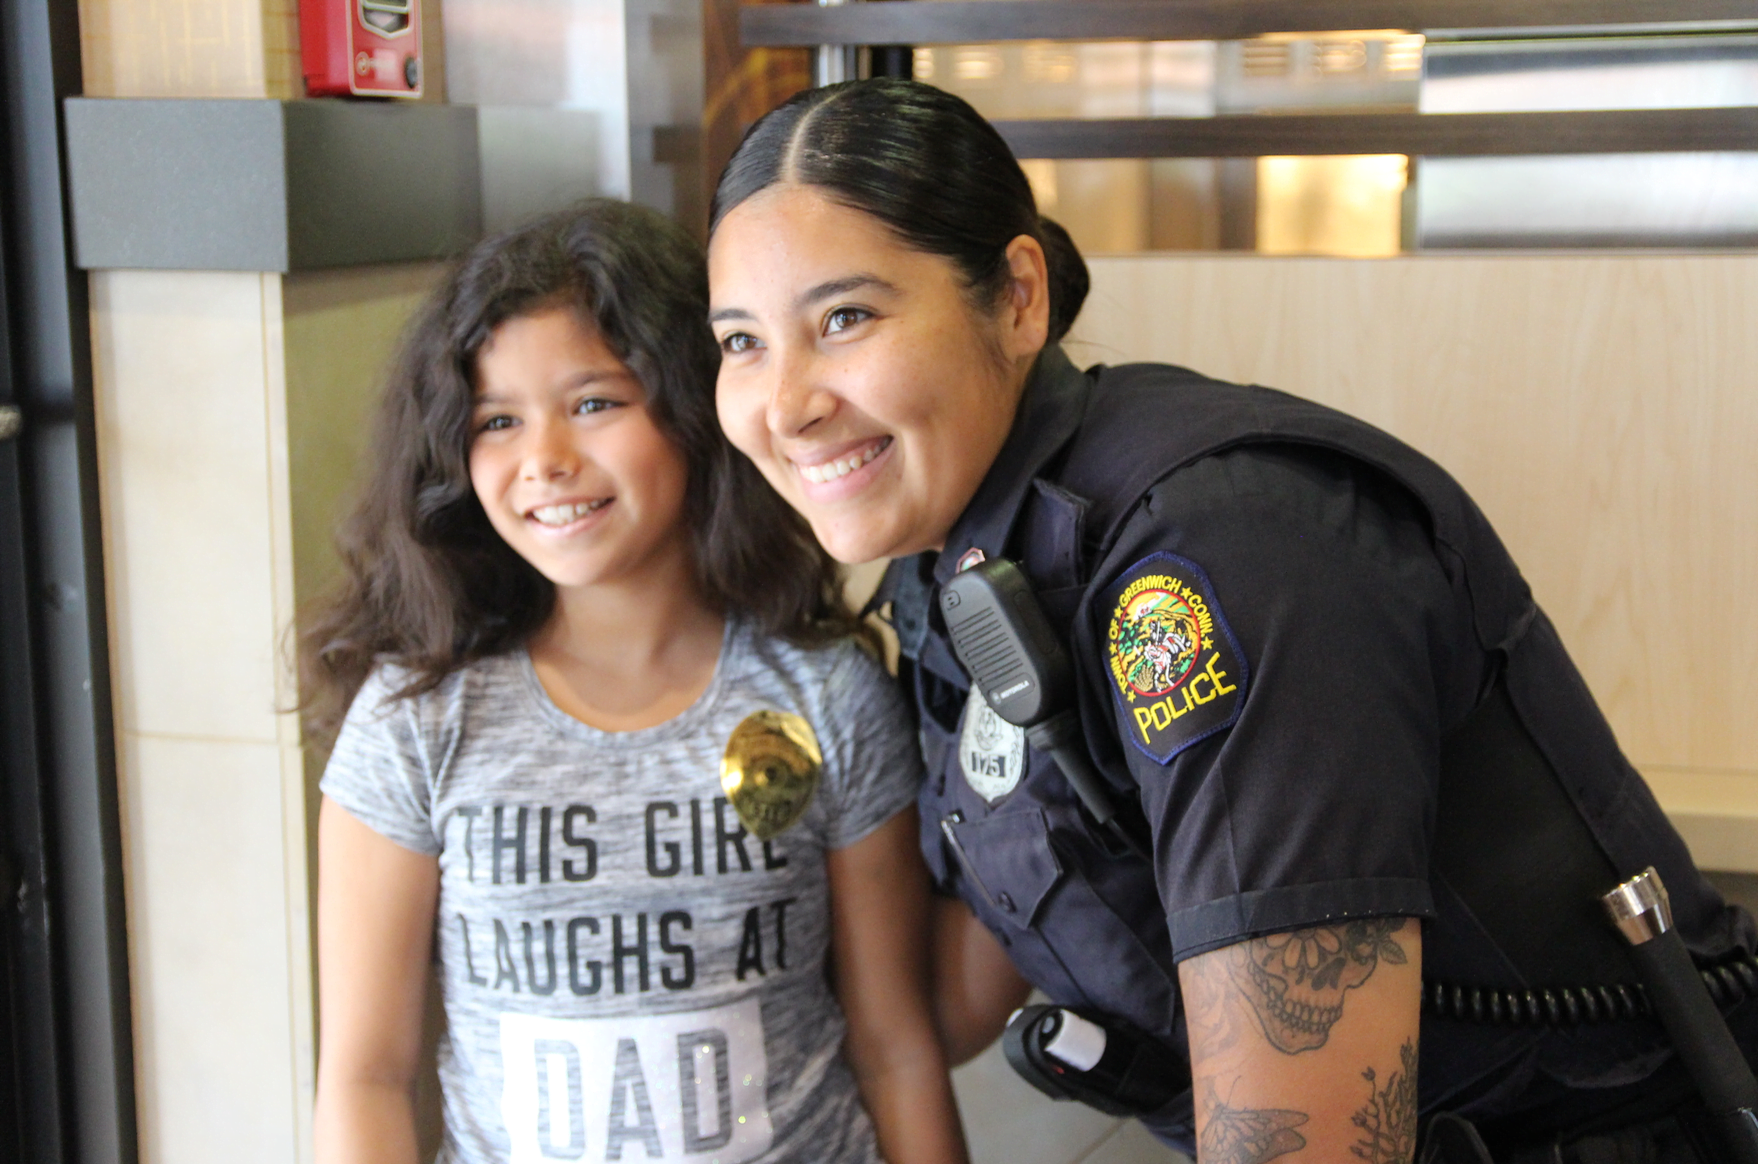 Isabella Ruggiero, 10, who stopped by McDonald's with her mother had a chance to ask Officer Garcia what is entailed in becoming a police officer.